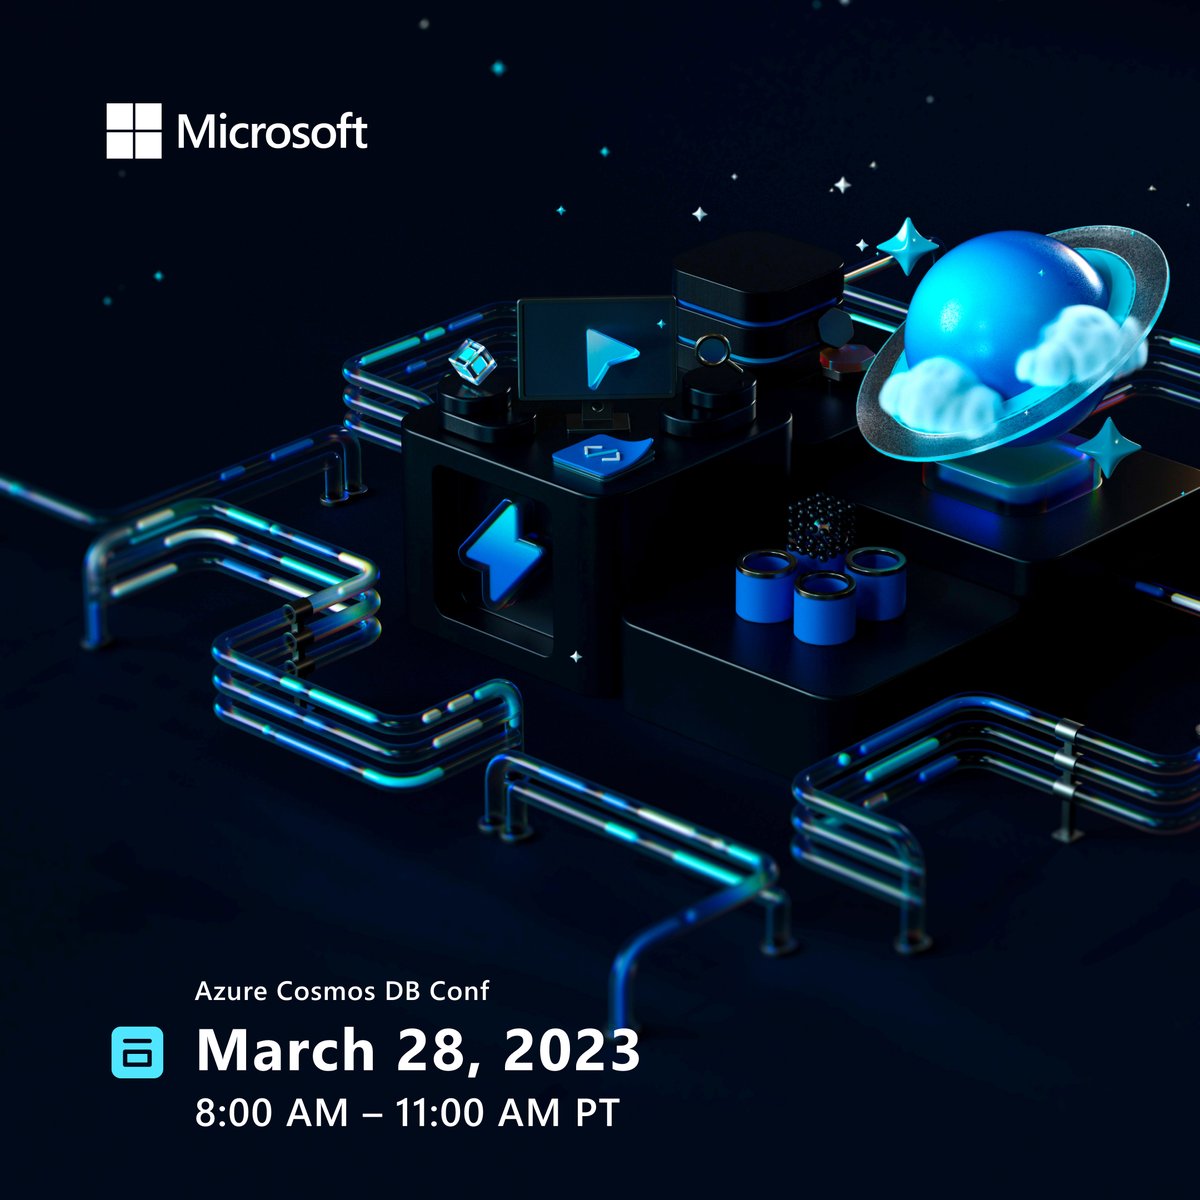 👀 Come check out what our community members are building in #AzureCosmosDB at #AzureCosmosDBConf

📅 March 28, 2023, 8AM PT | 11AM PT

👉 Pre-Register Now: via.anuraj.dev/azure-cosmos-d…